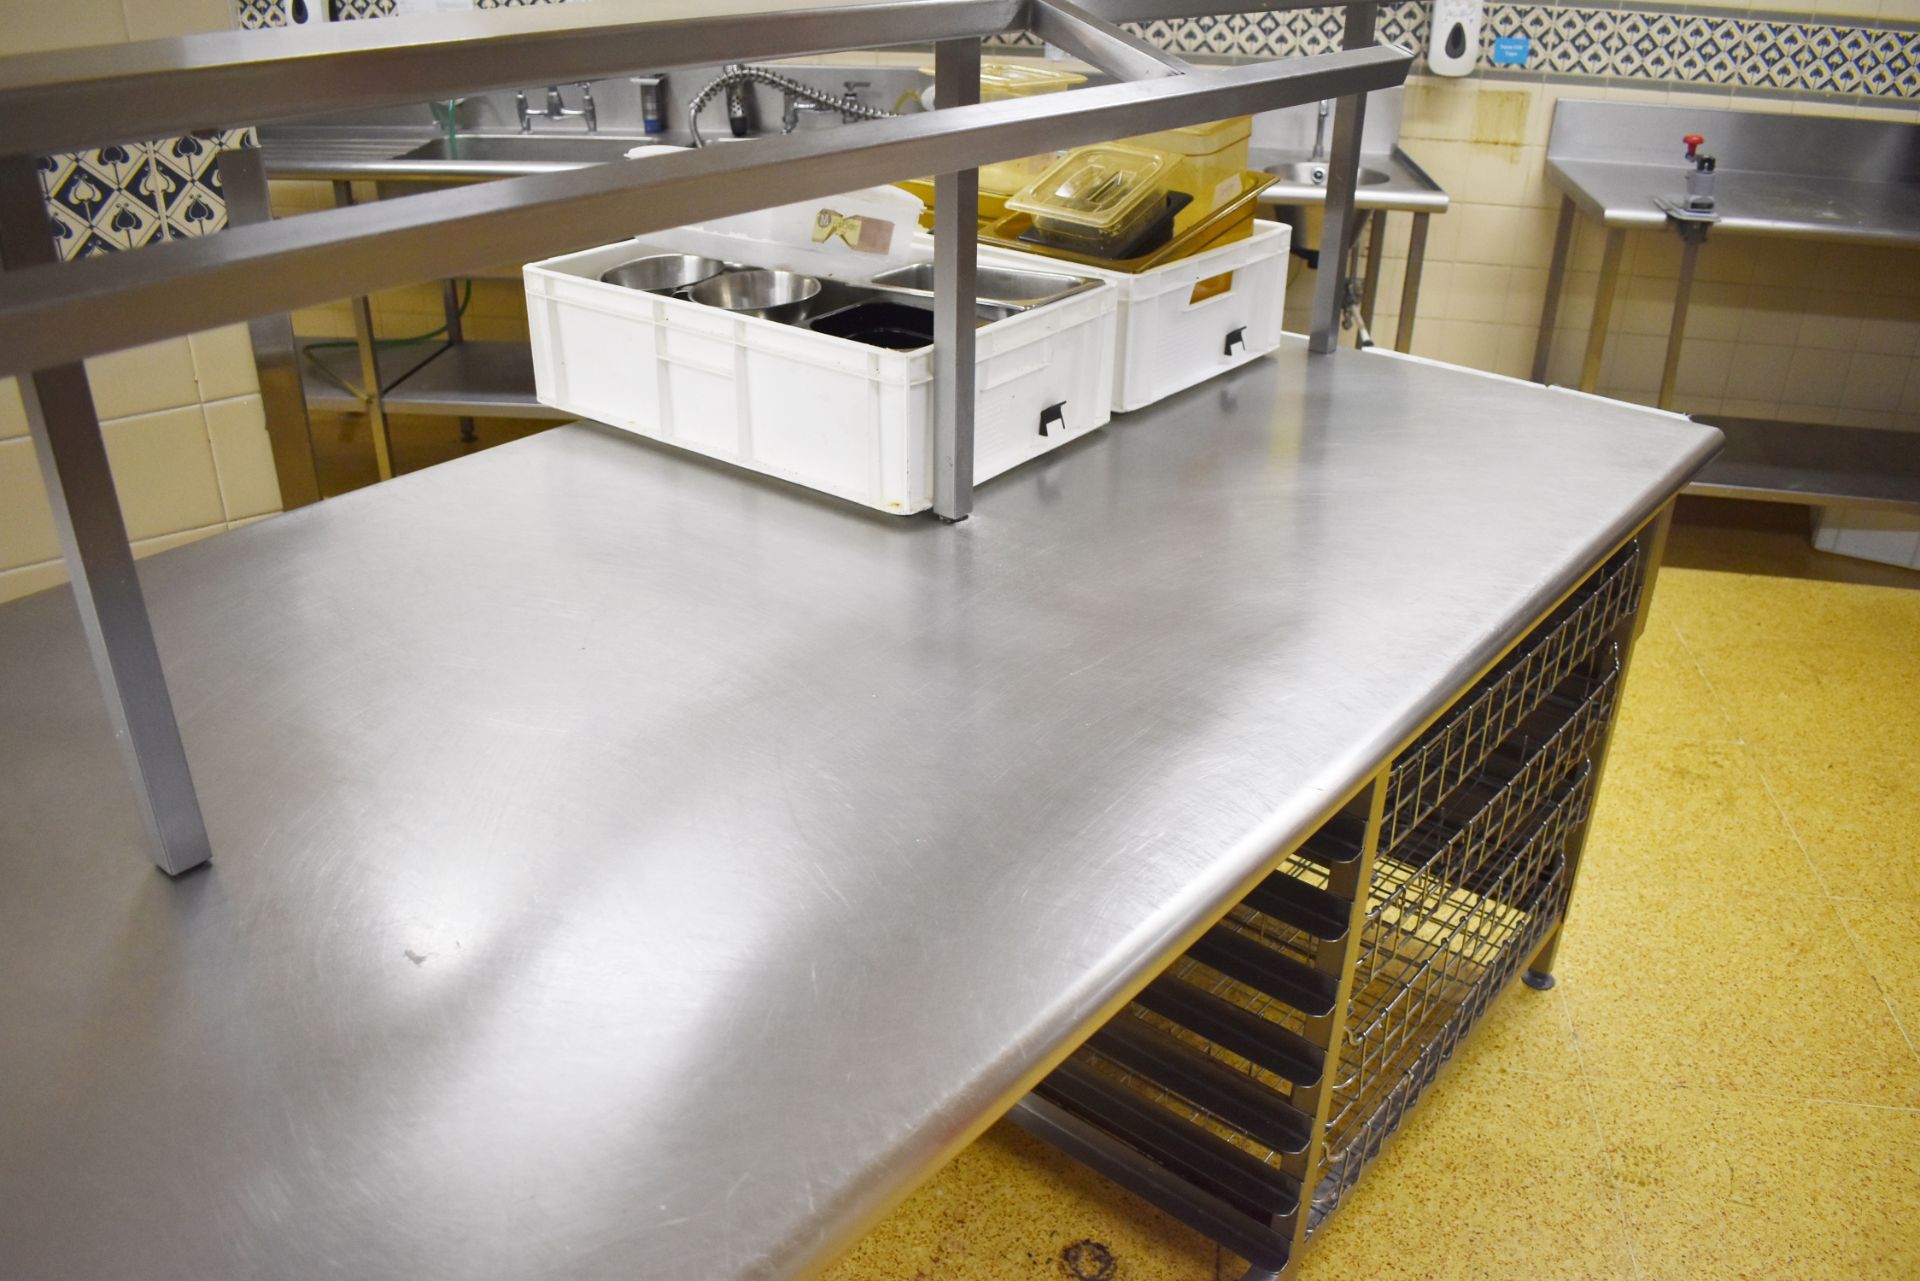 1 x Stainless Steel Commercial Kitchen Island - 10 x 4ft - Features Overhead Gastro Pan Holders, - Image 3 of 10